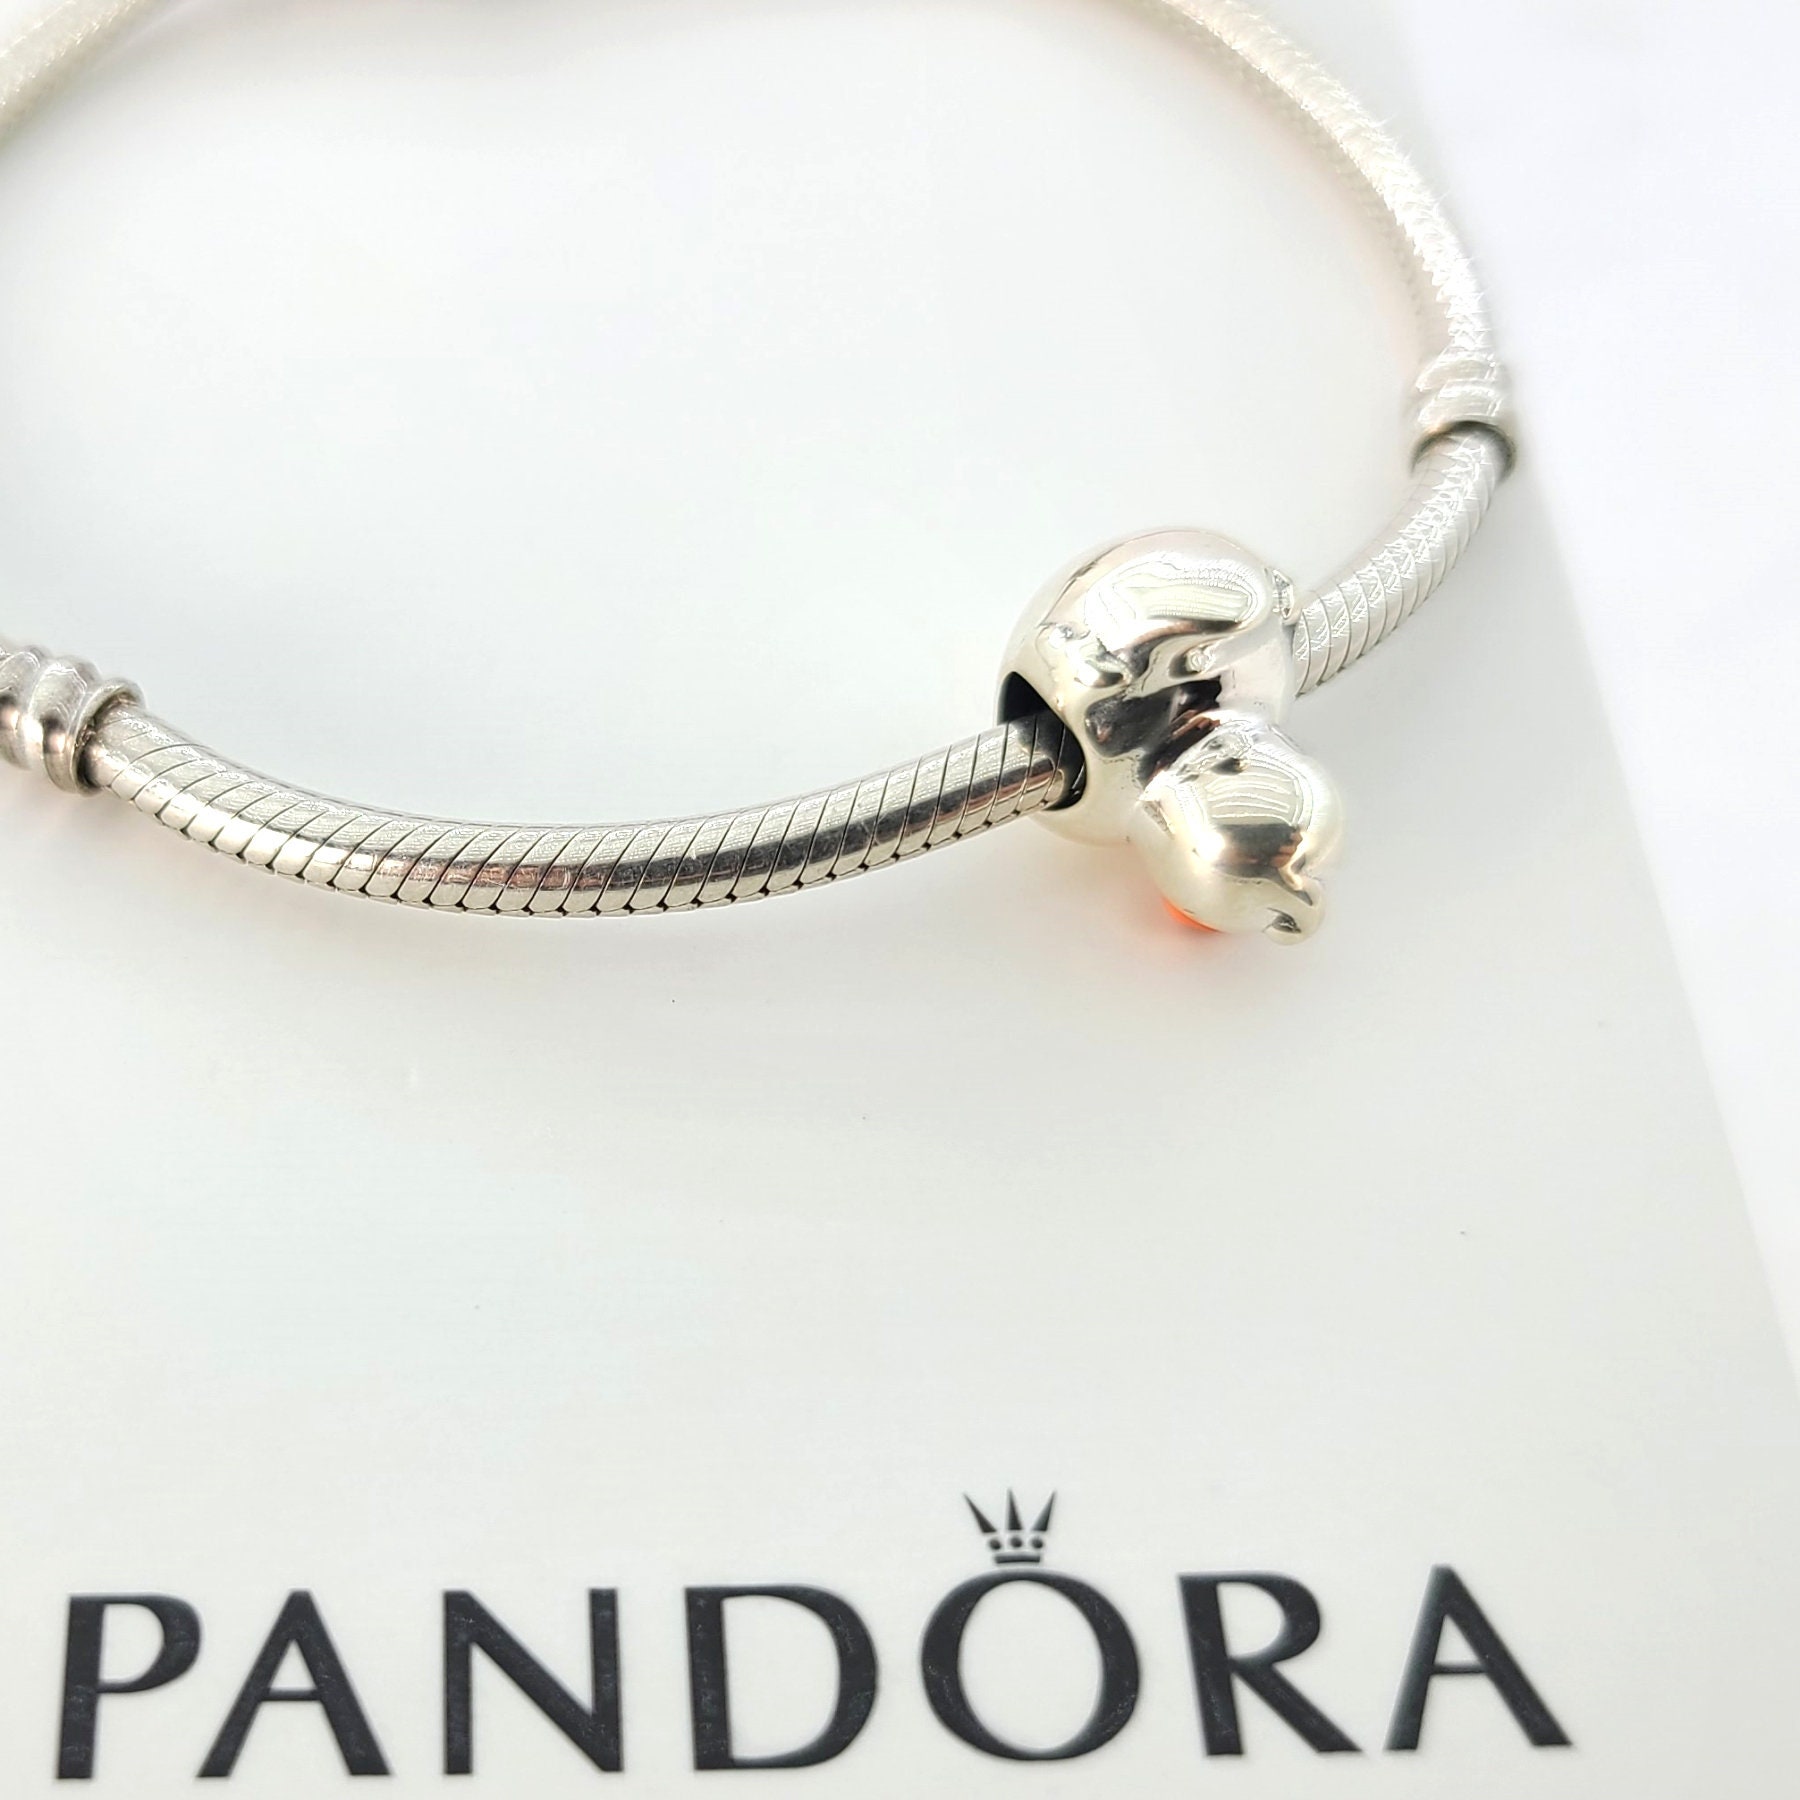 New Pandora Sterling Silver Polished Rubber Duck Charm - Etsy